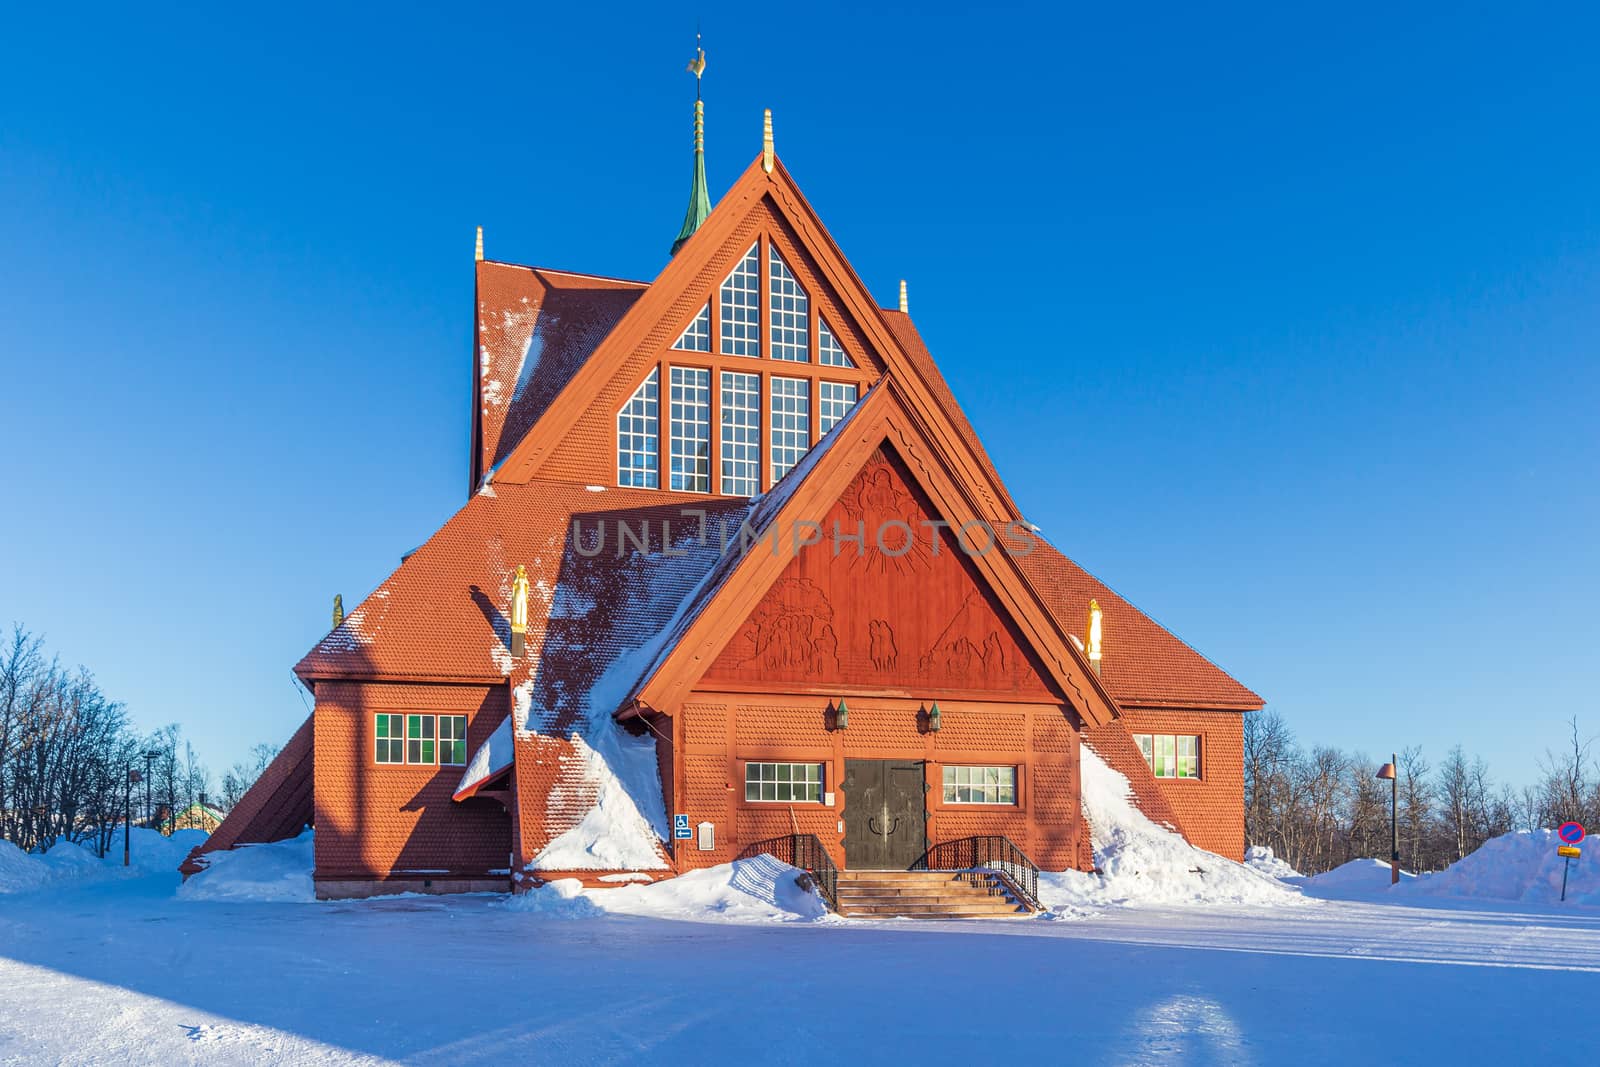 Kiruna Church is one of Sweden's largest wooden buildings. The church exterior is built in a Gothic Revival style.